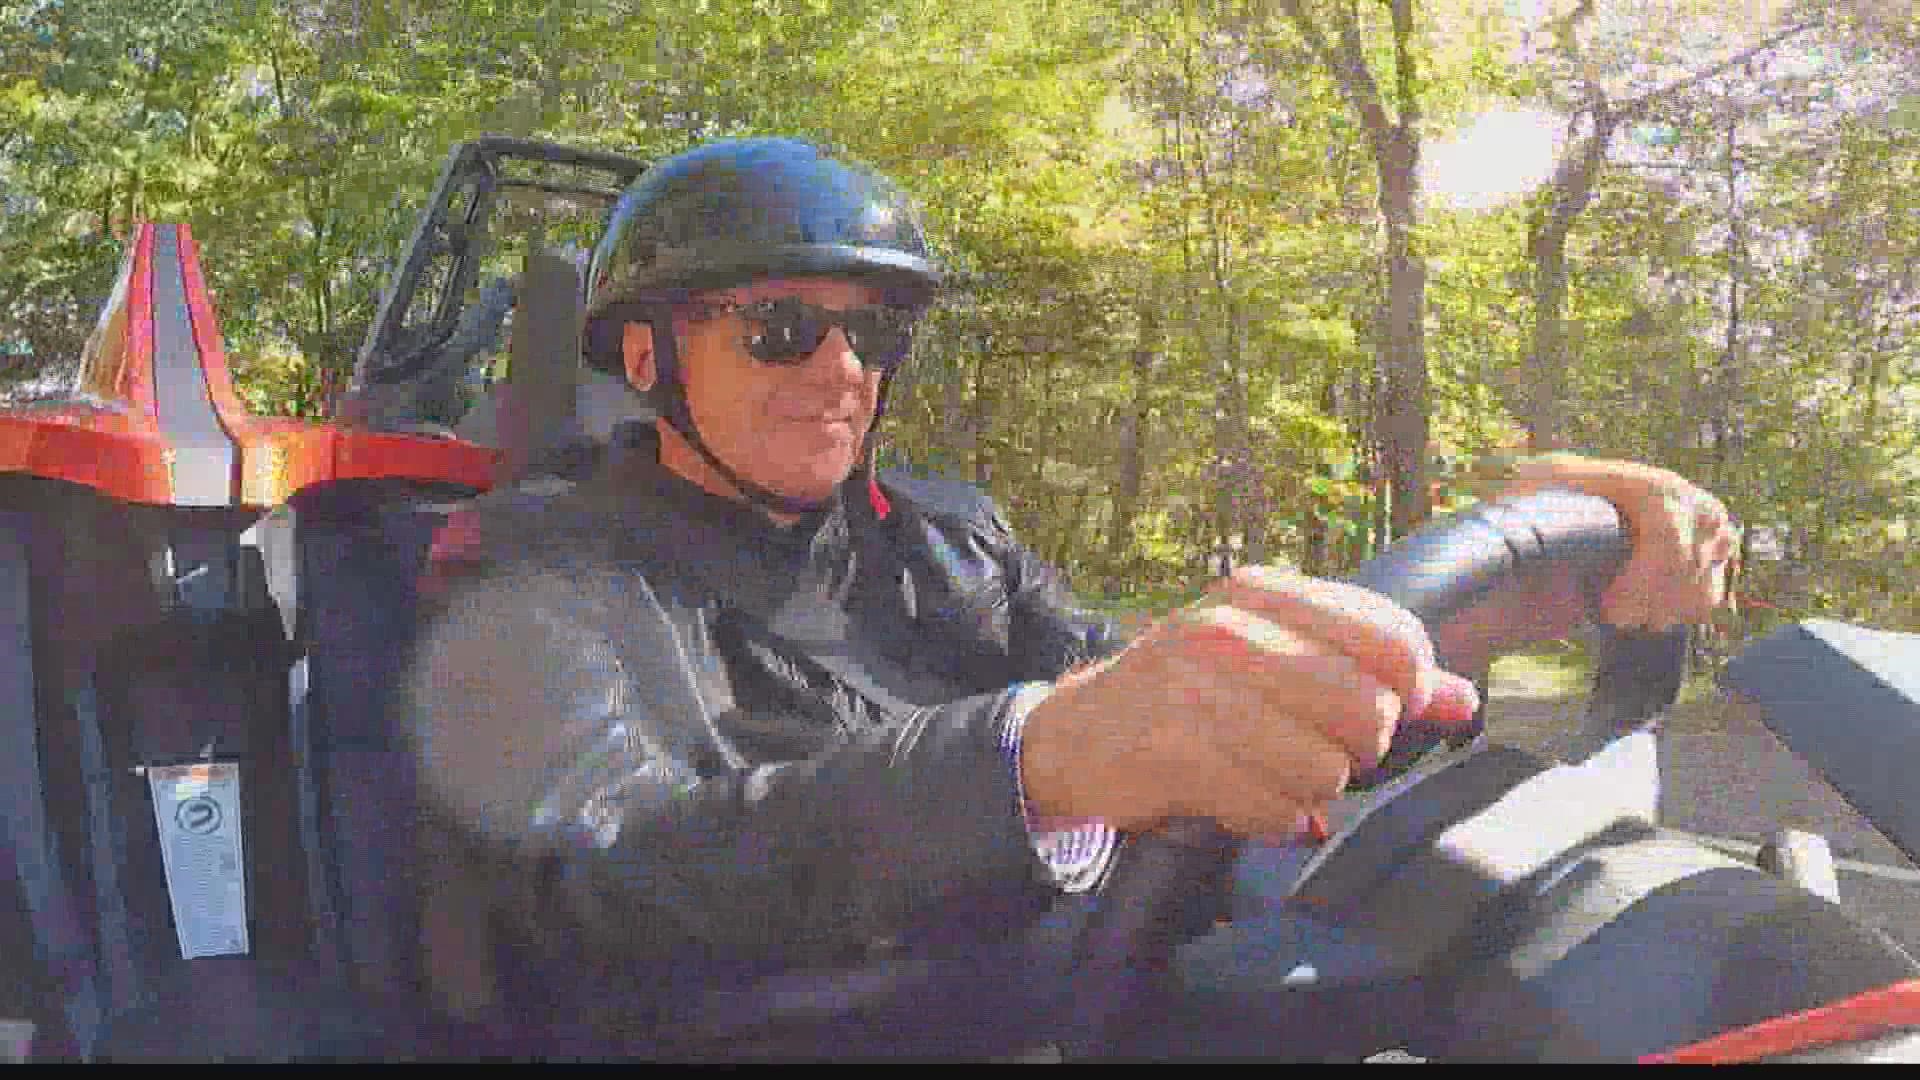 It was a 360-degree thrill as Chuck drove along the Blue Ridge Parkway in the Polaris Slingshot.